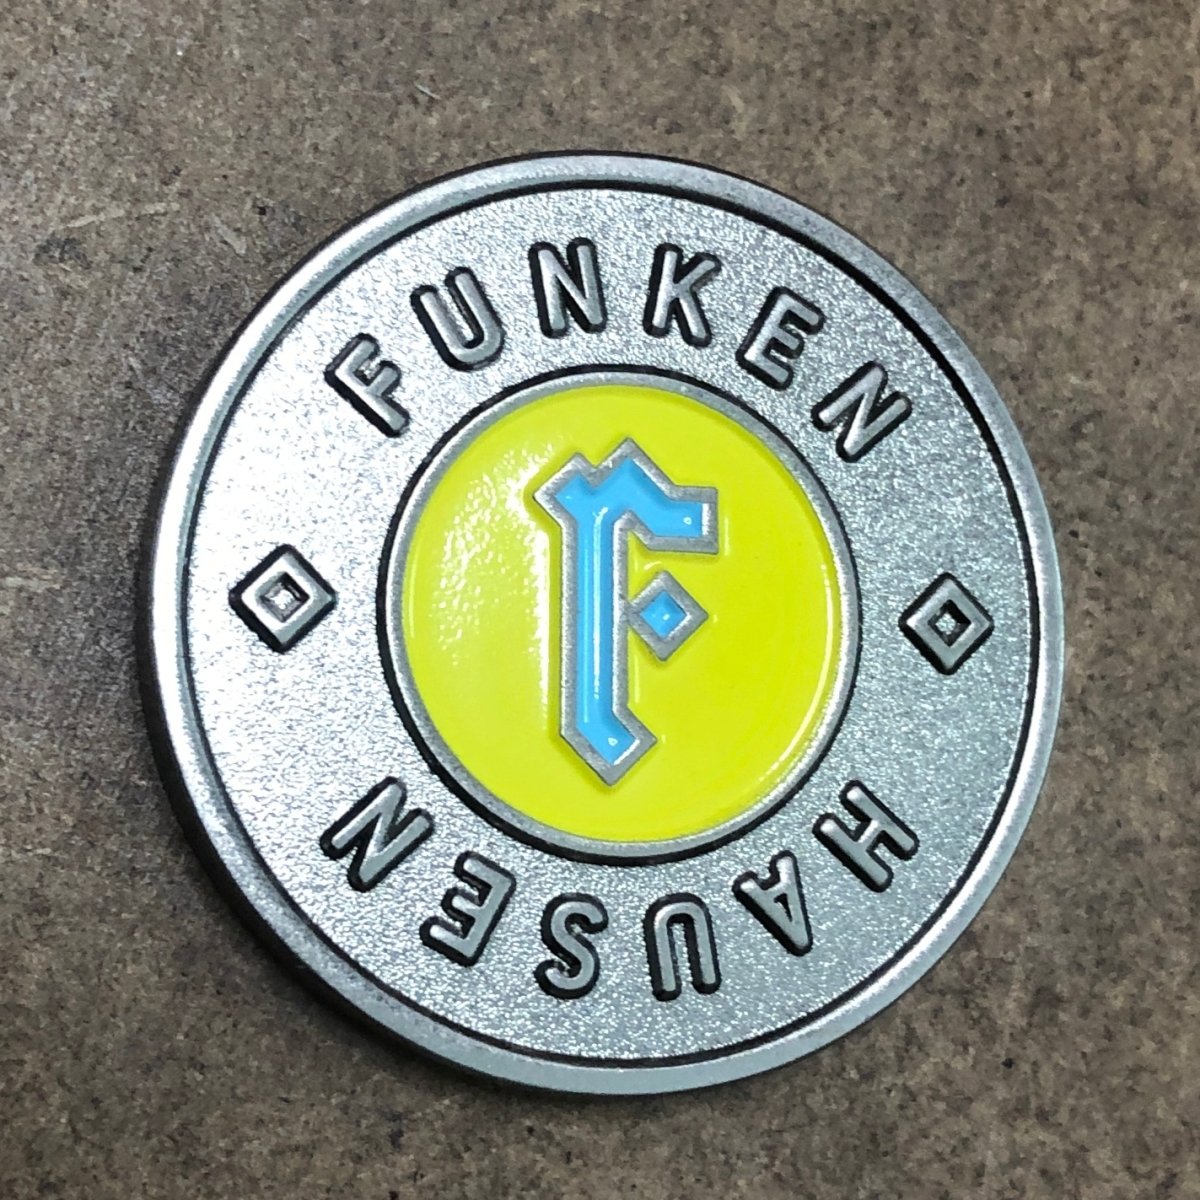 Coins & Challenge Coins 2D - Double Sided - Soft Enamel - Alchemy Merch